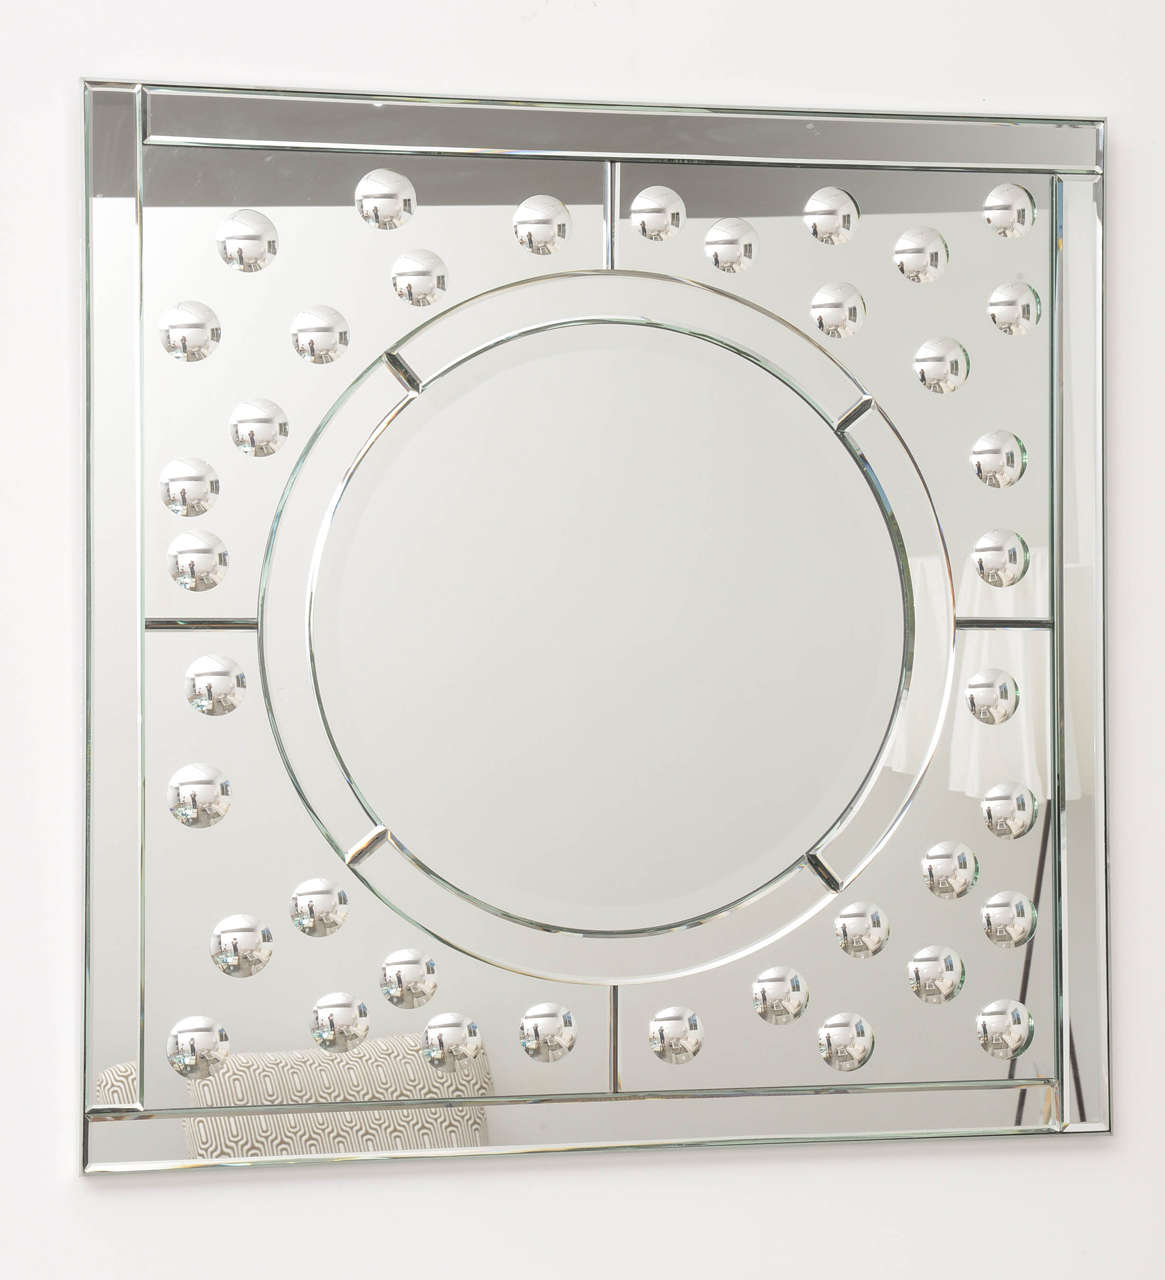 Stunning square 1980s beveled and bubbled bullseye convex mirror. This mirror measures 35 inches high by 35 inches wide.

Please feel free to contact us directly for a shipping quote, or other questions and information including making an offer by